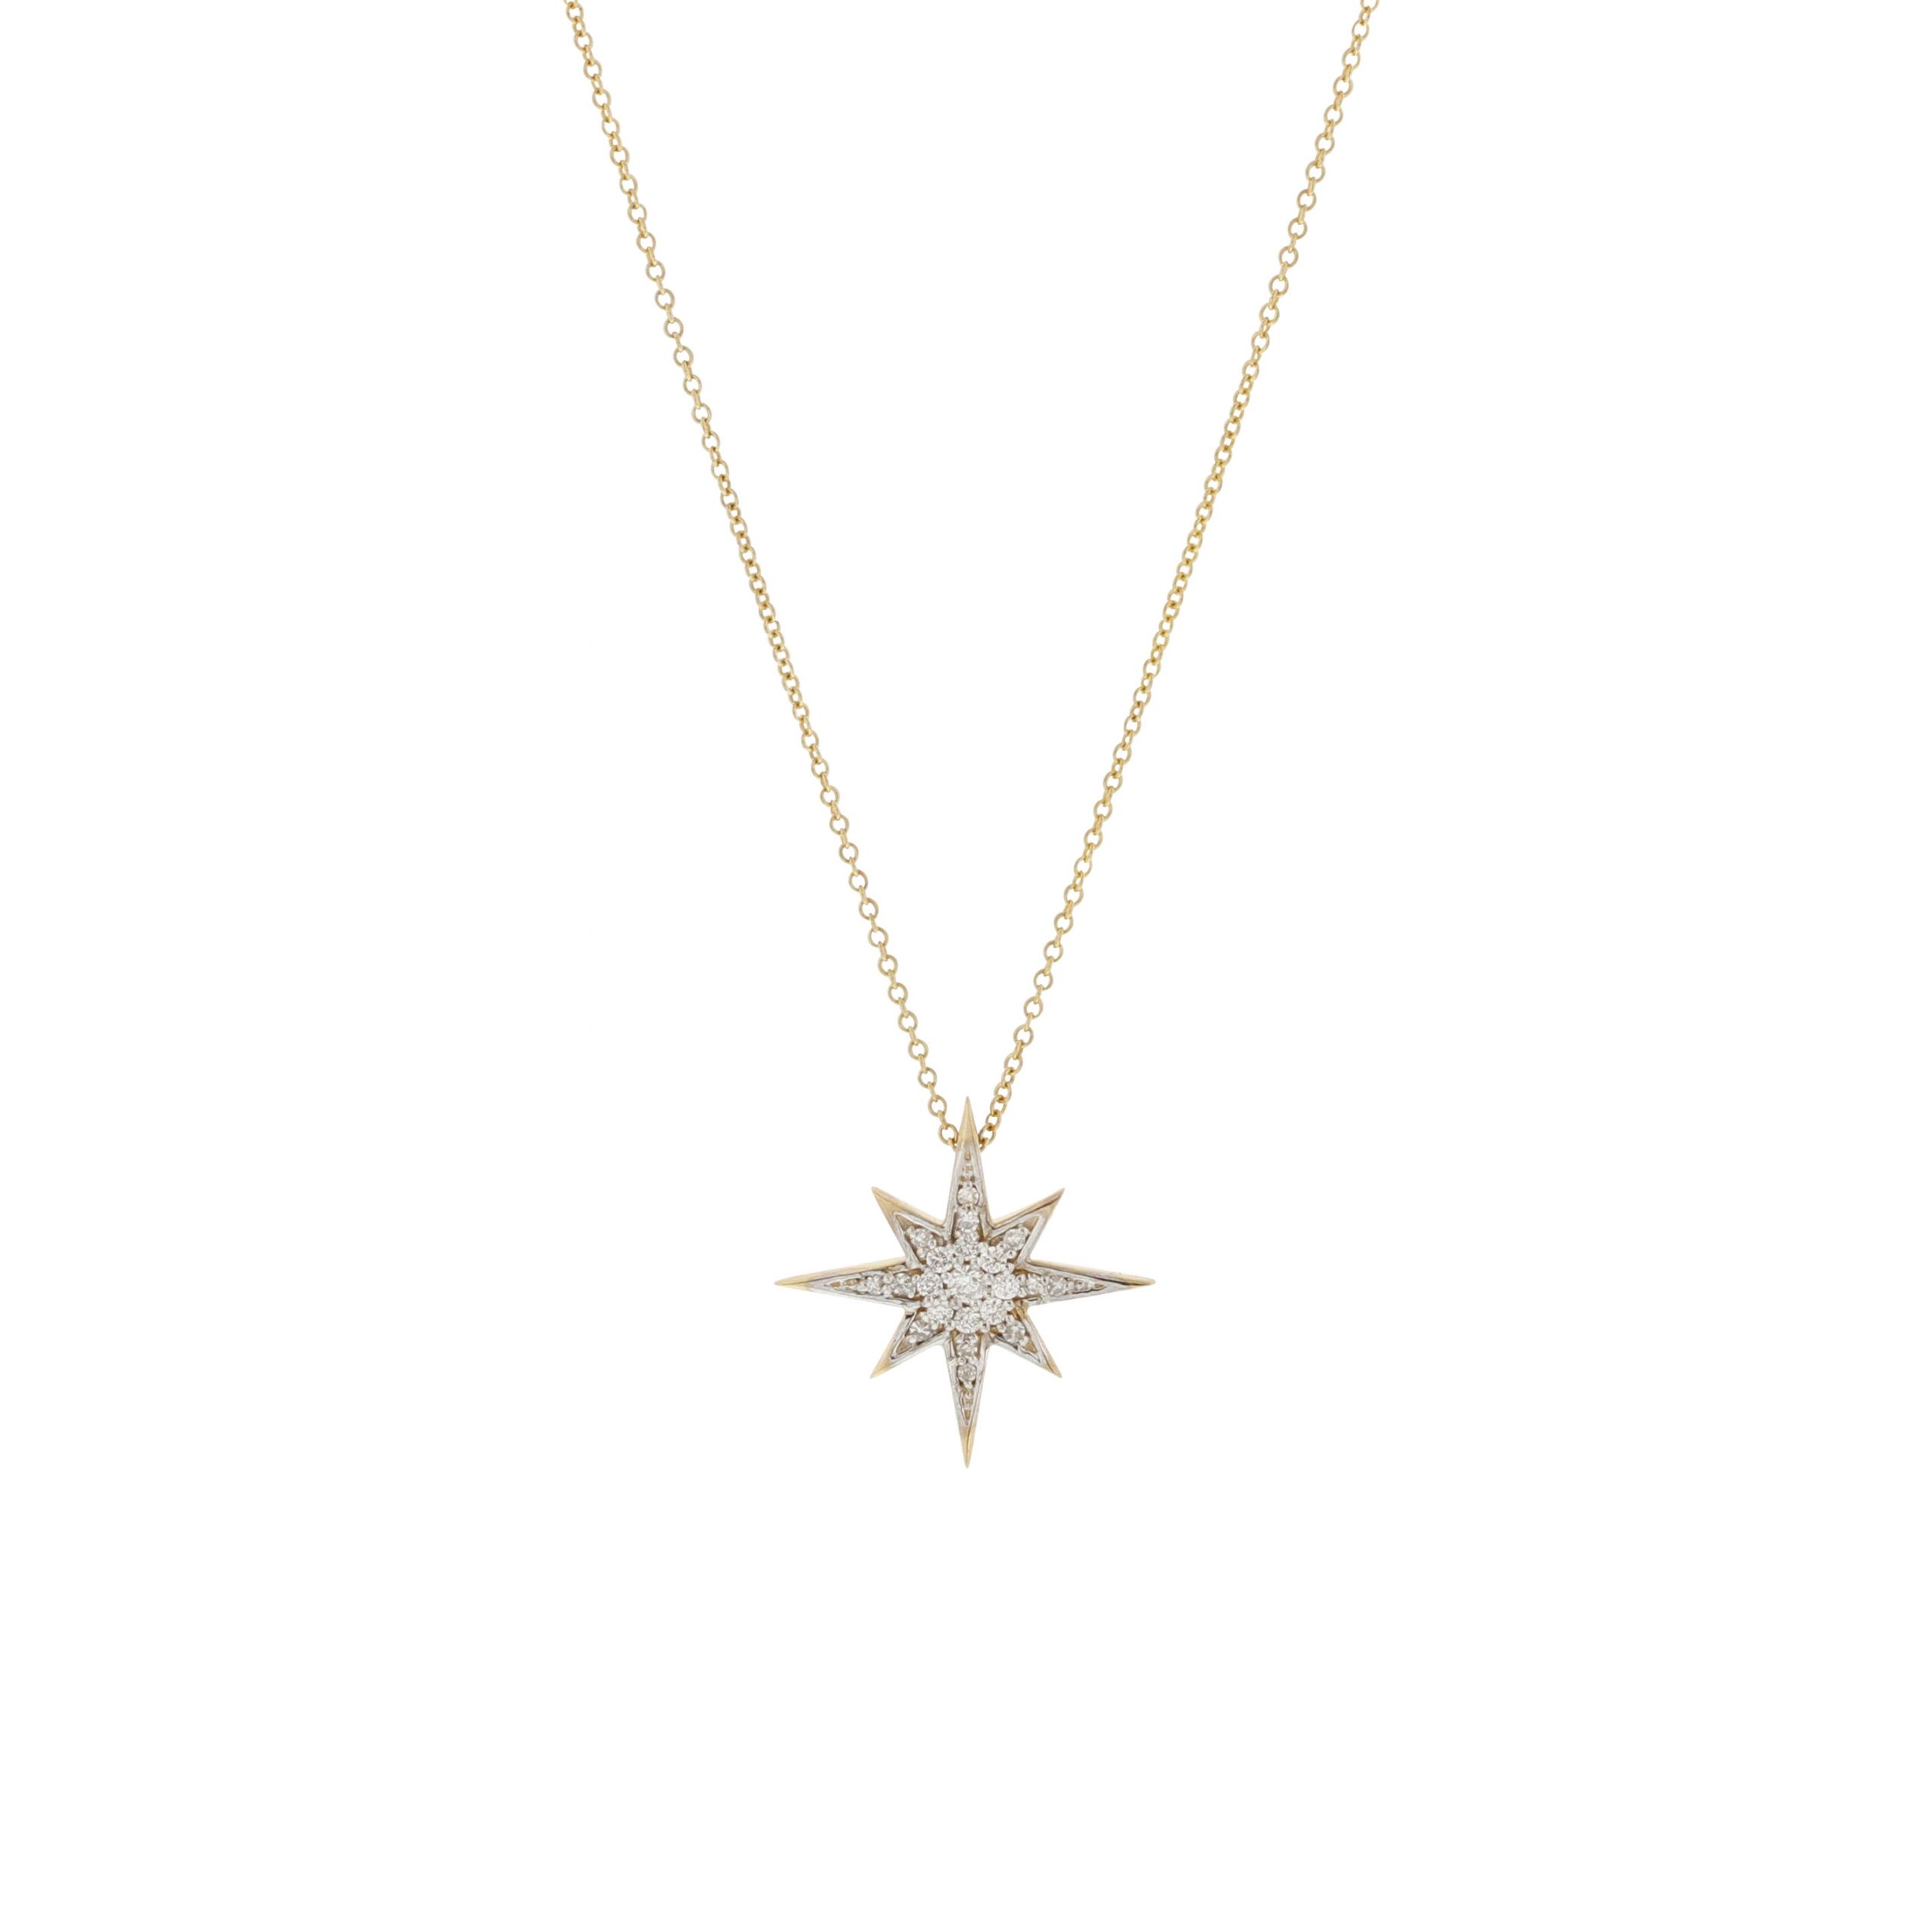 North Star Necklace
 DIAMOND NORTH STAR & 14KT GOLD NECKLACE CELESTIAL